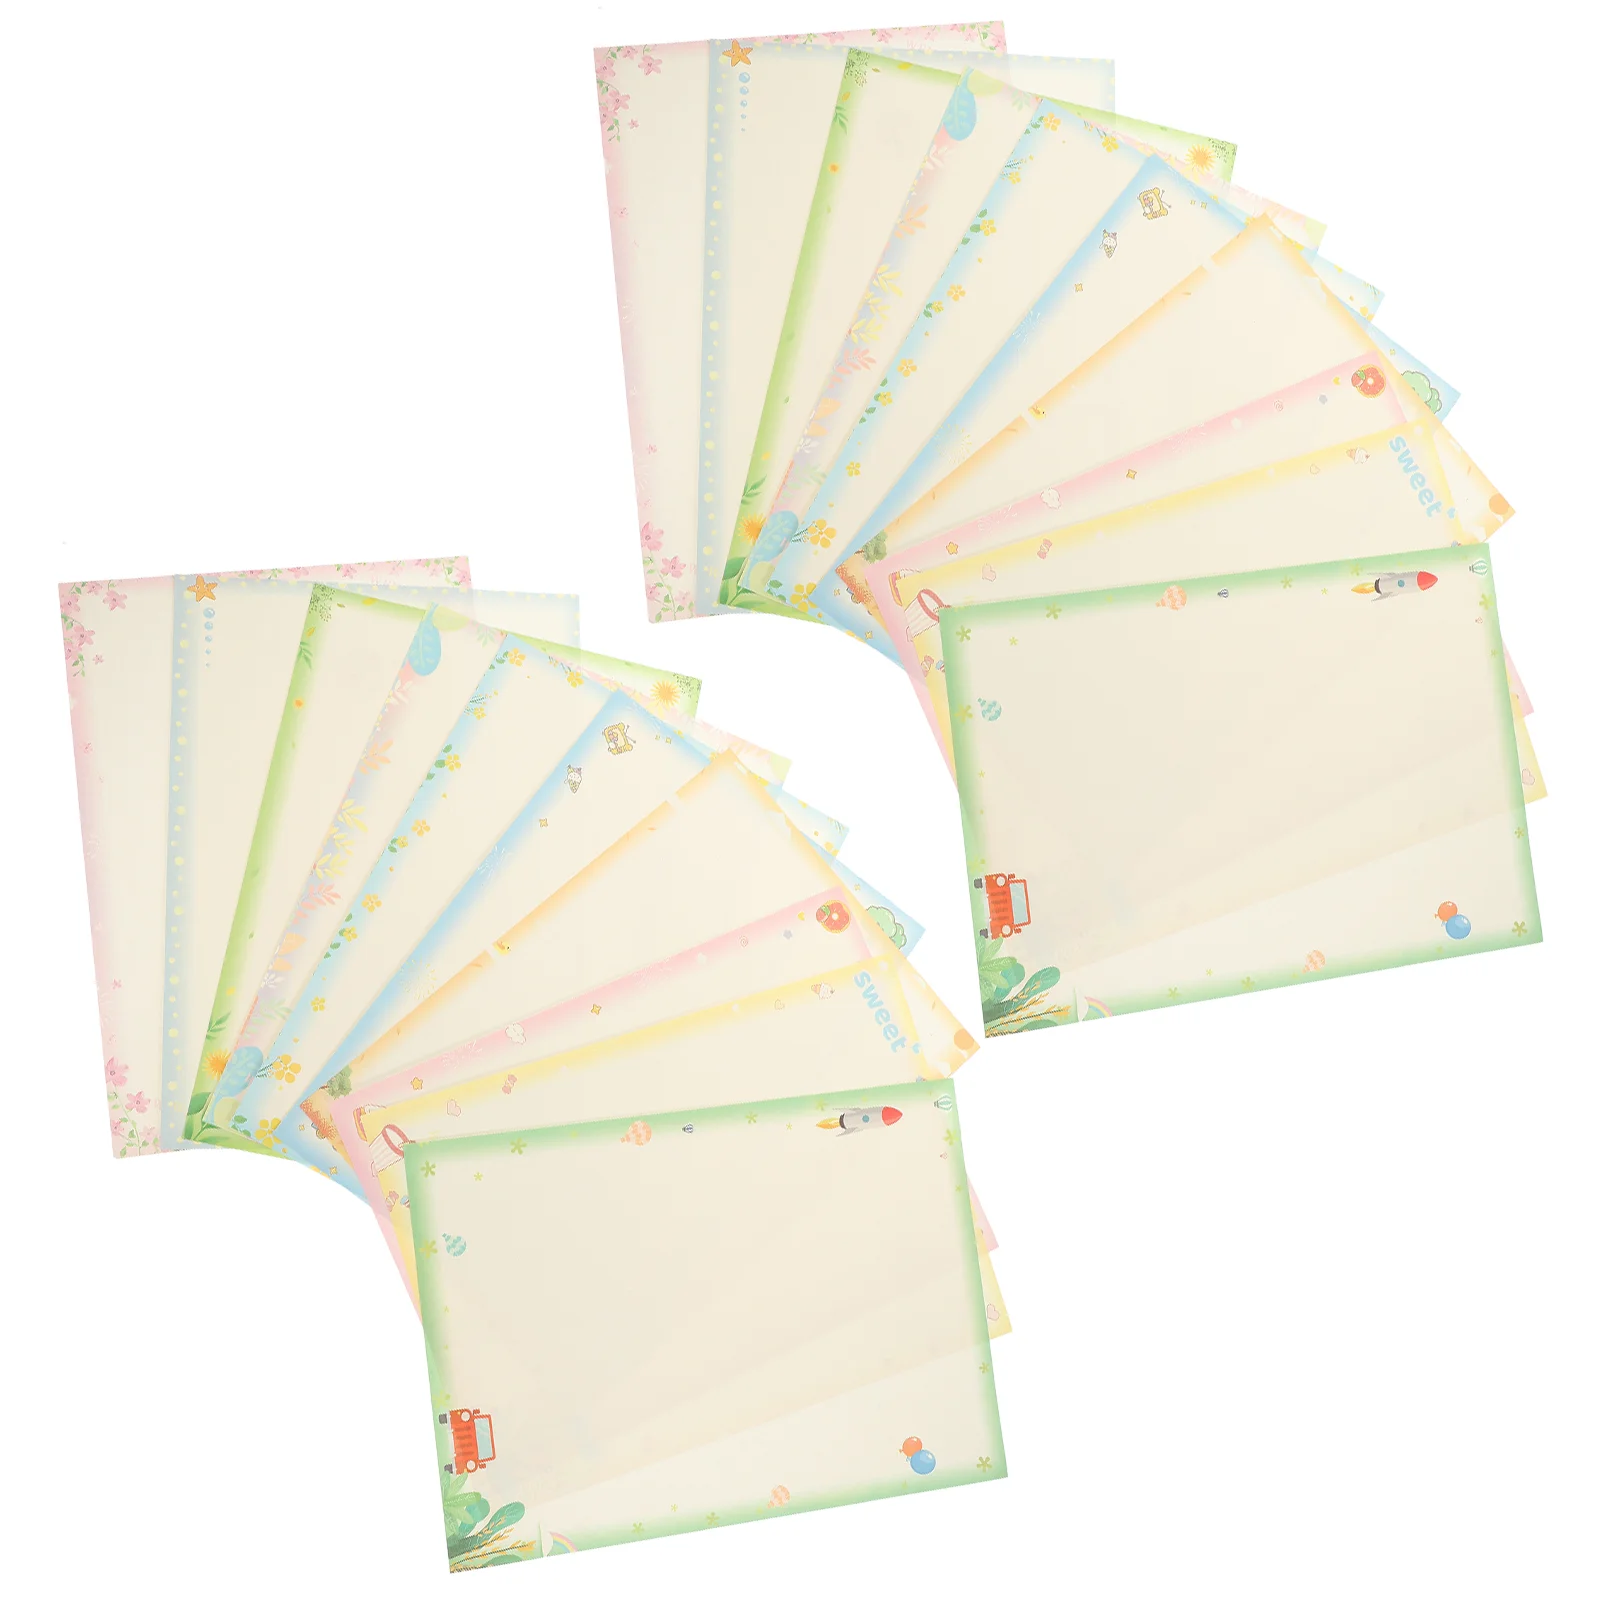 

50 Sheets A4 Lace Computer Paper Color Copy Painting Printing 1 Pack (50pcs) Crafting Folding